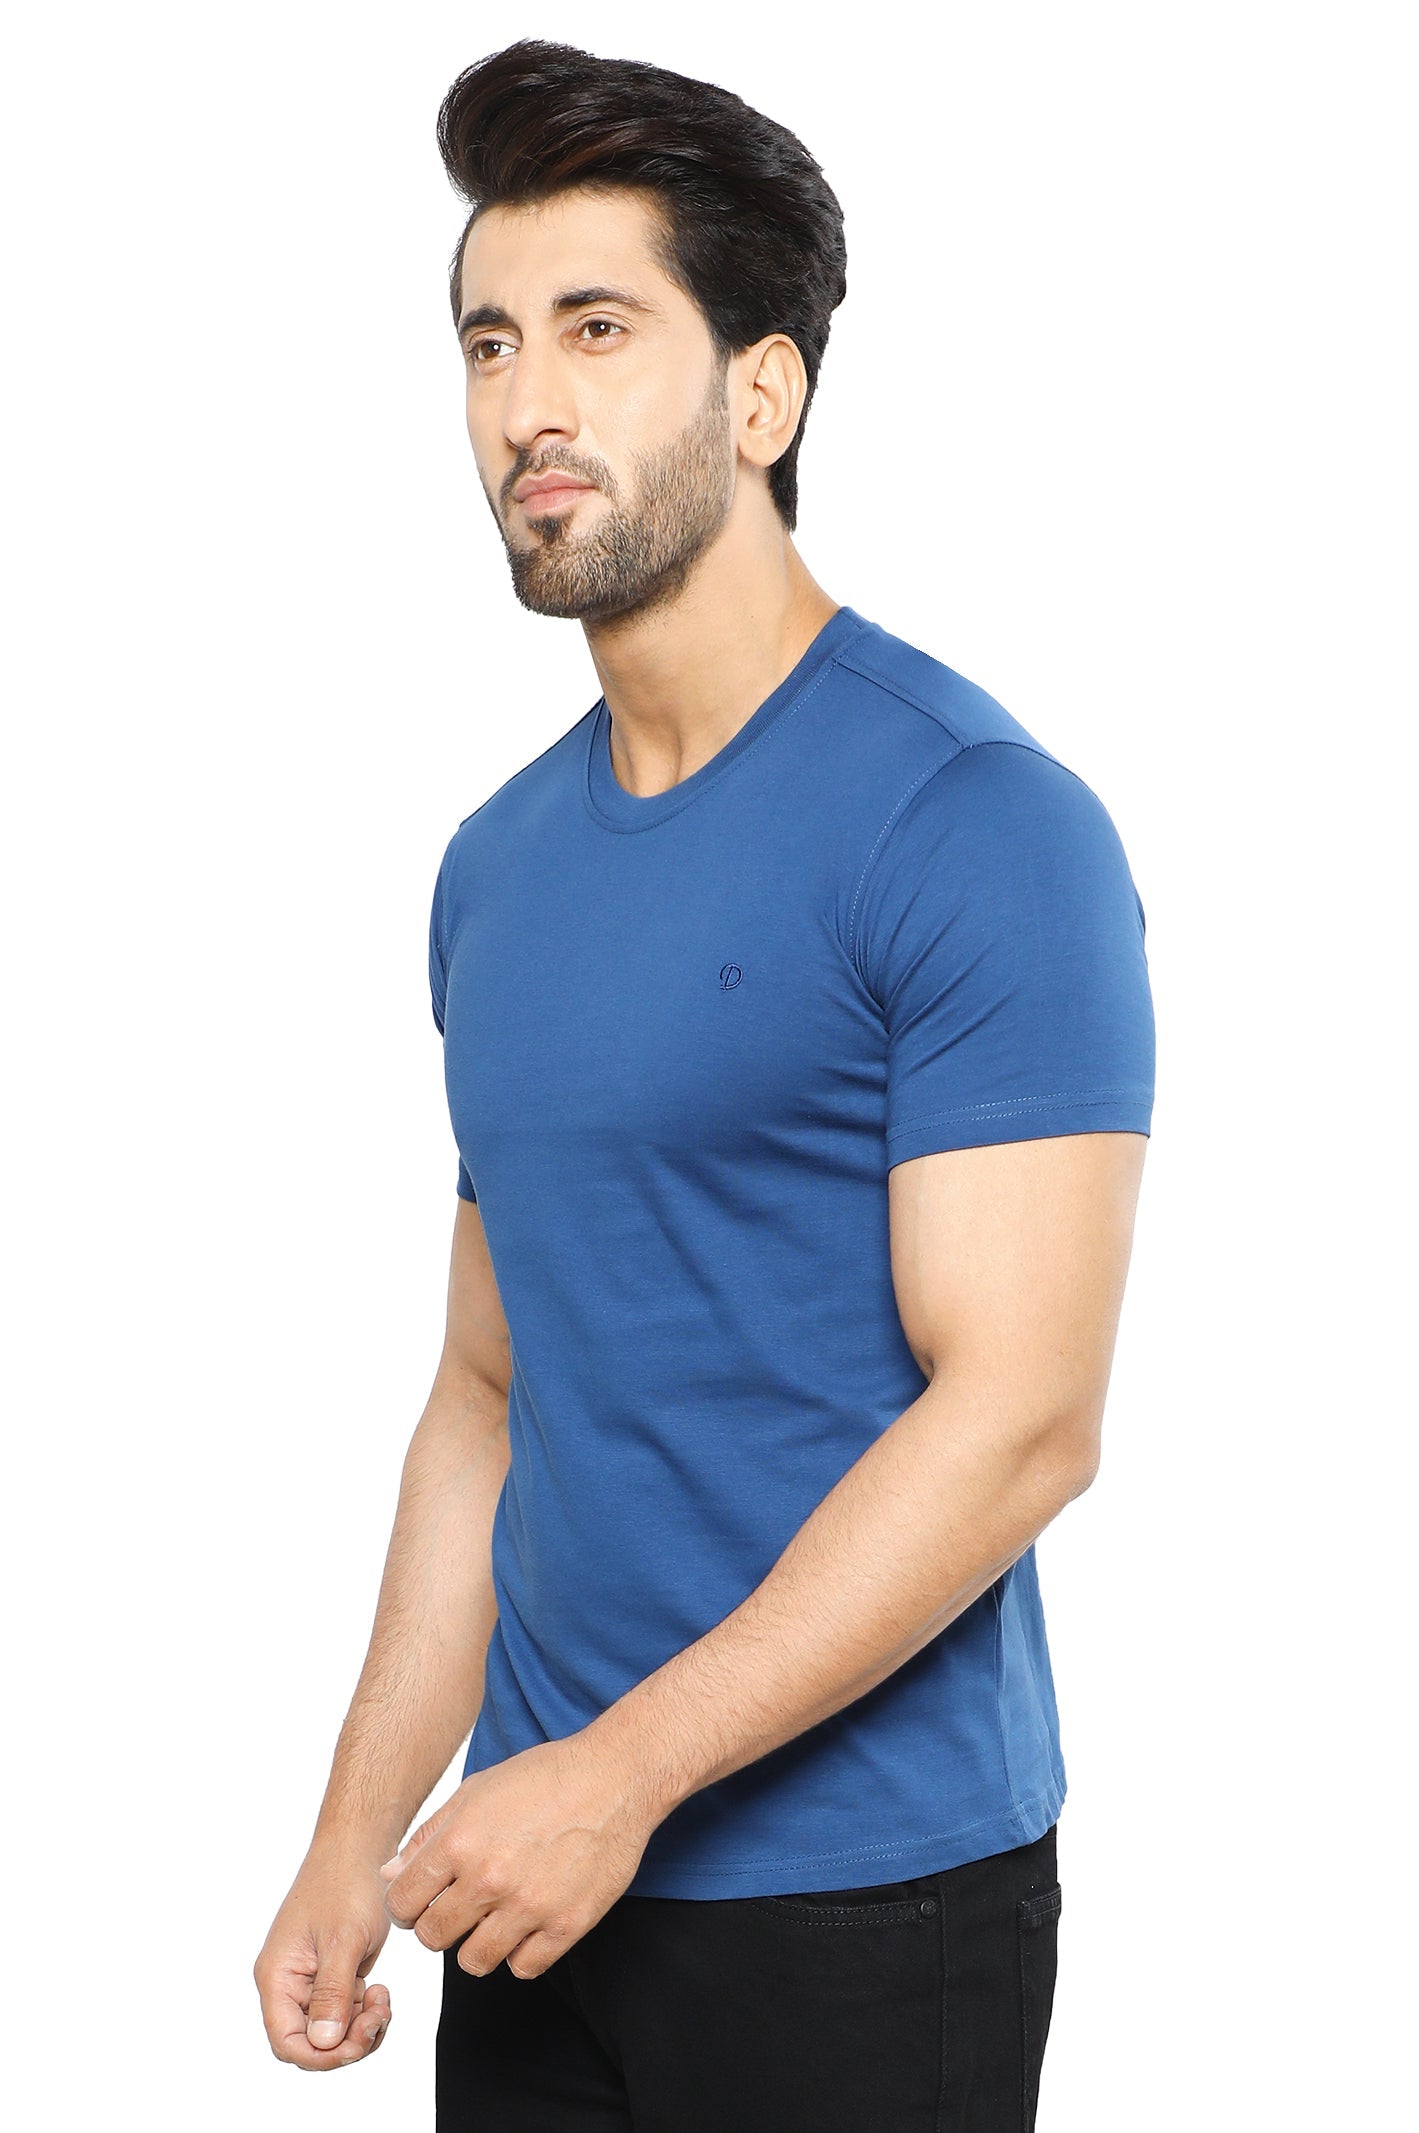 Diners Men's Round Neck T-Shirt SKU: NA856-N-BLUE - Diners